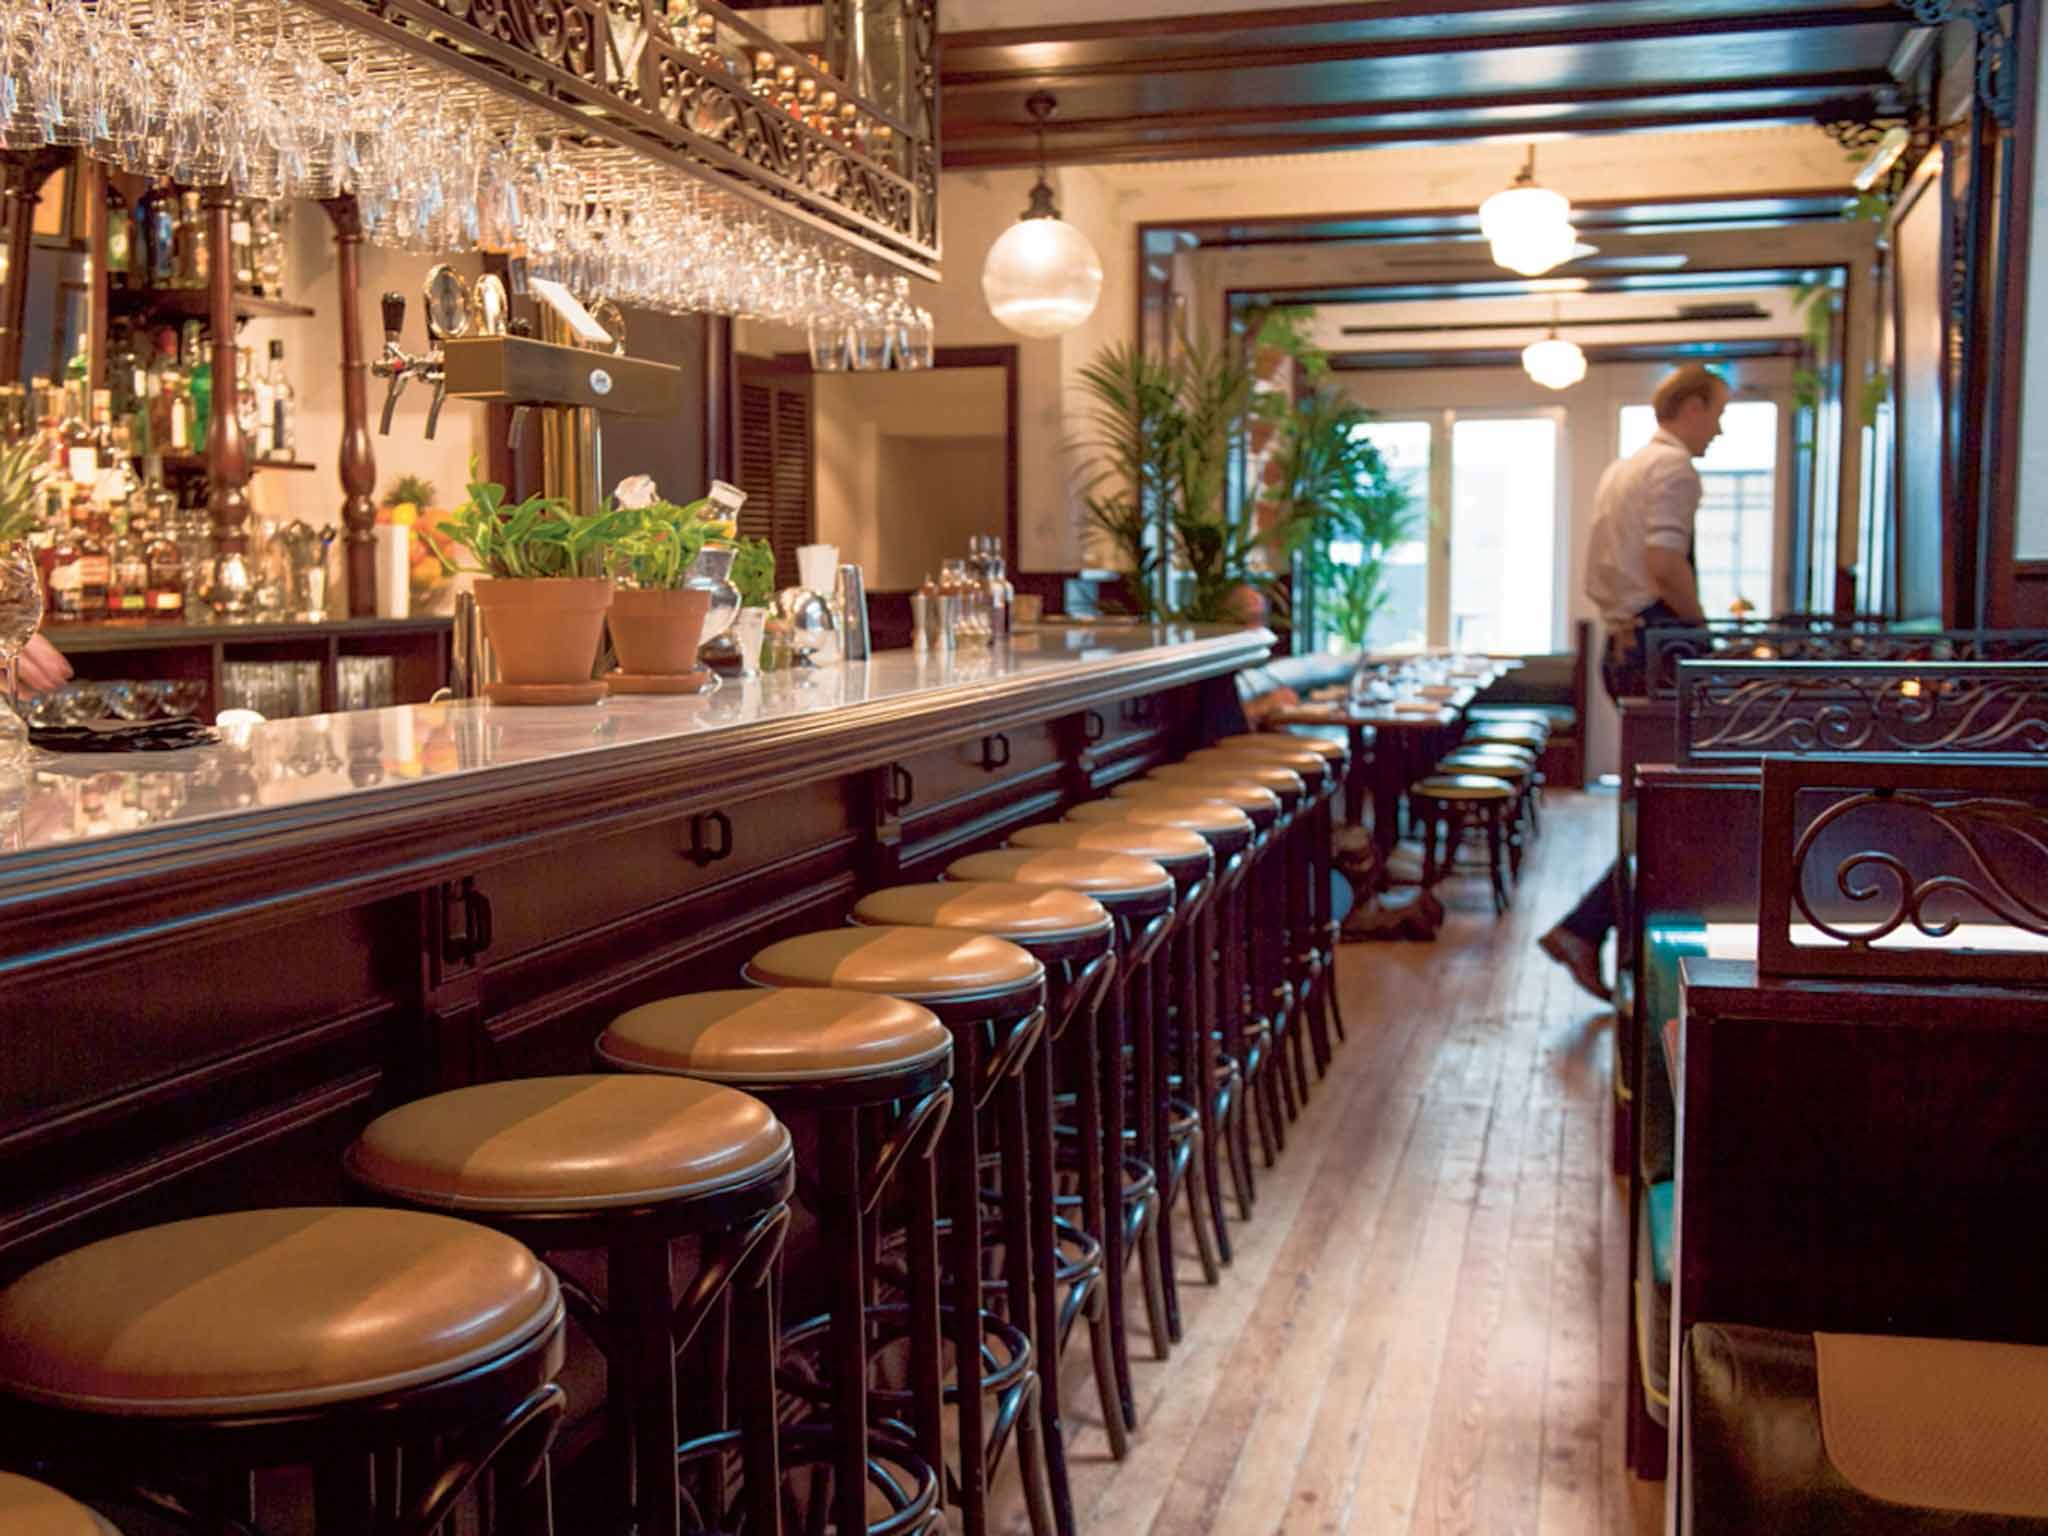 Shotgun, London W1 - restaurant review: A US-style barbecue joint that ...